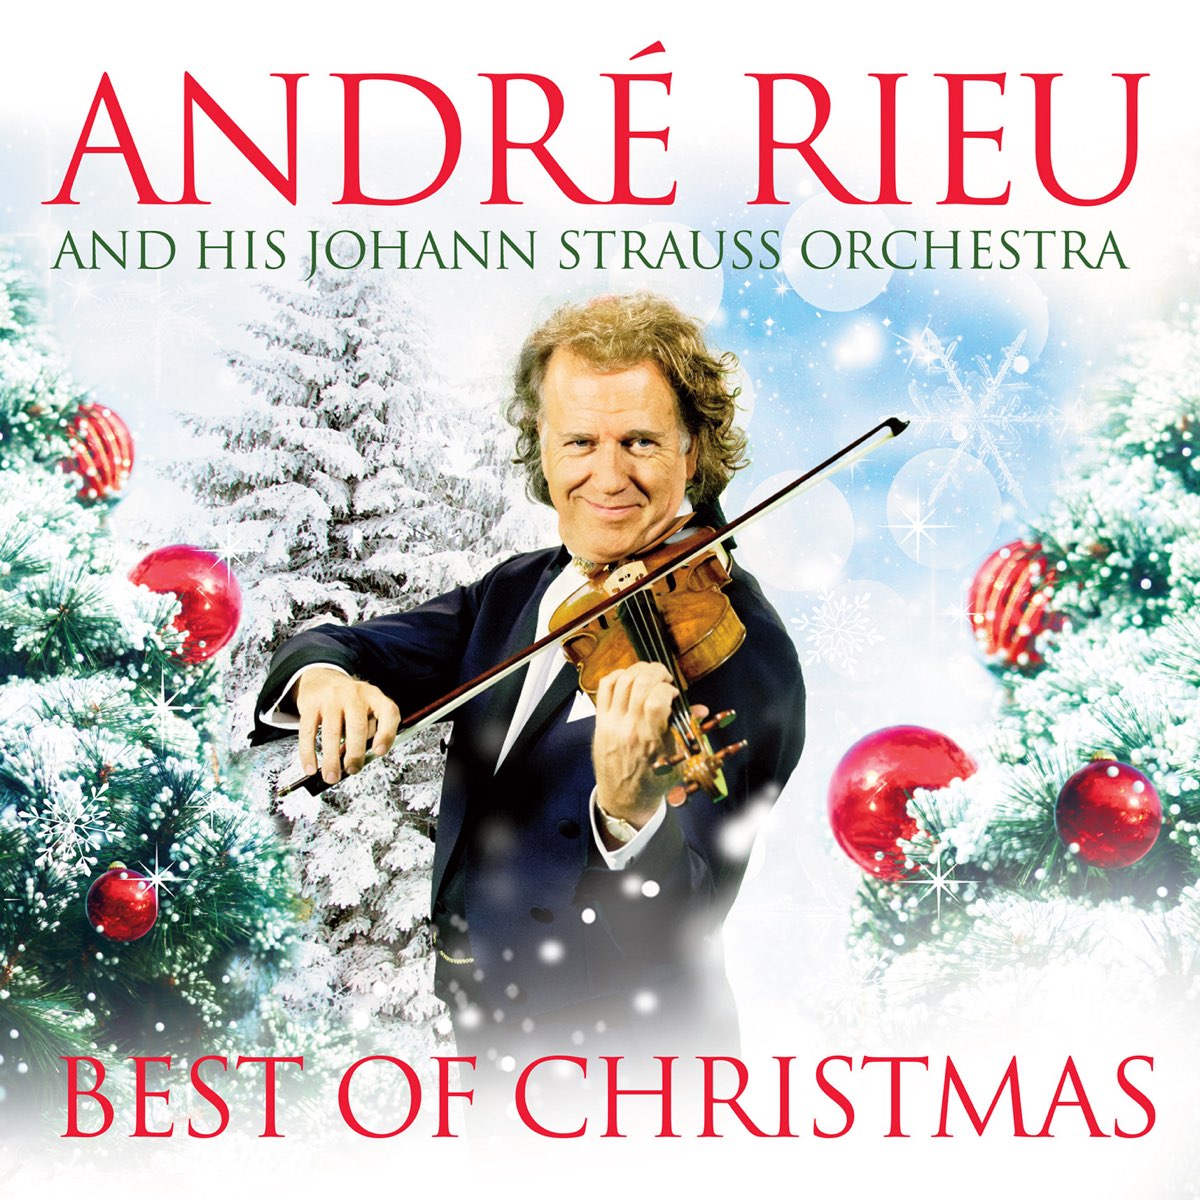 ‎Best of Christmas by André Rieu & Johann Strauss Orchestra on Apple Music